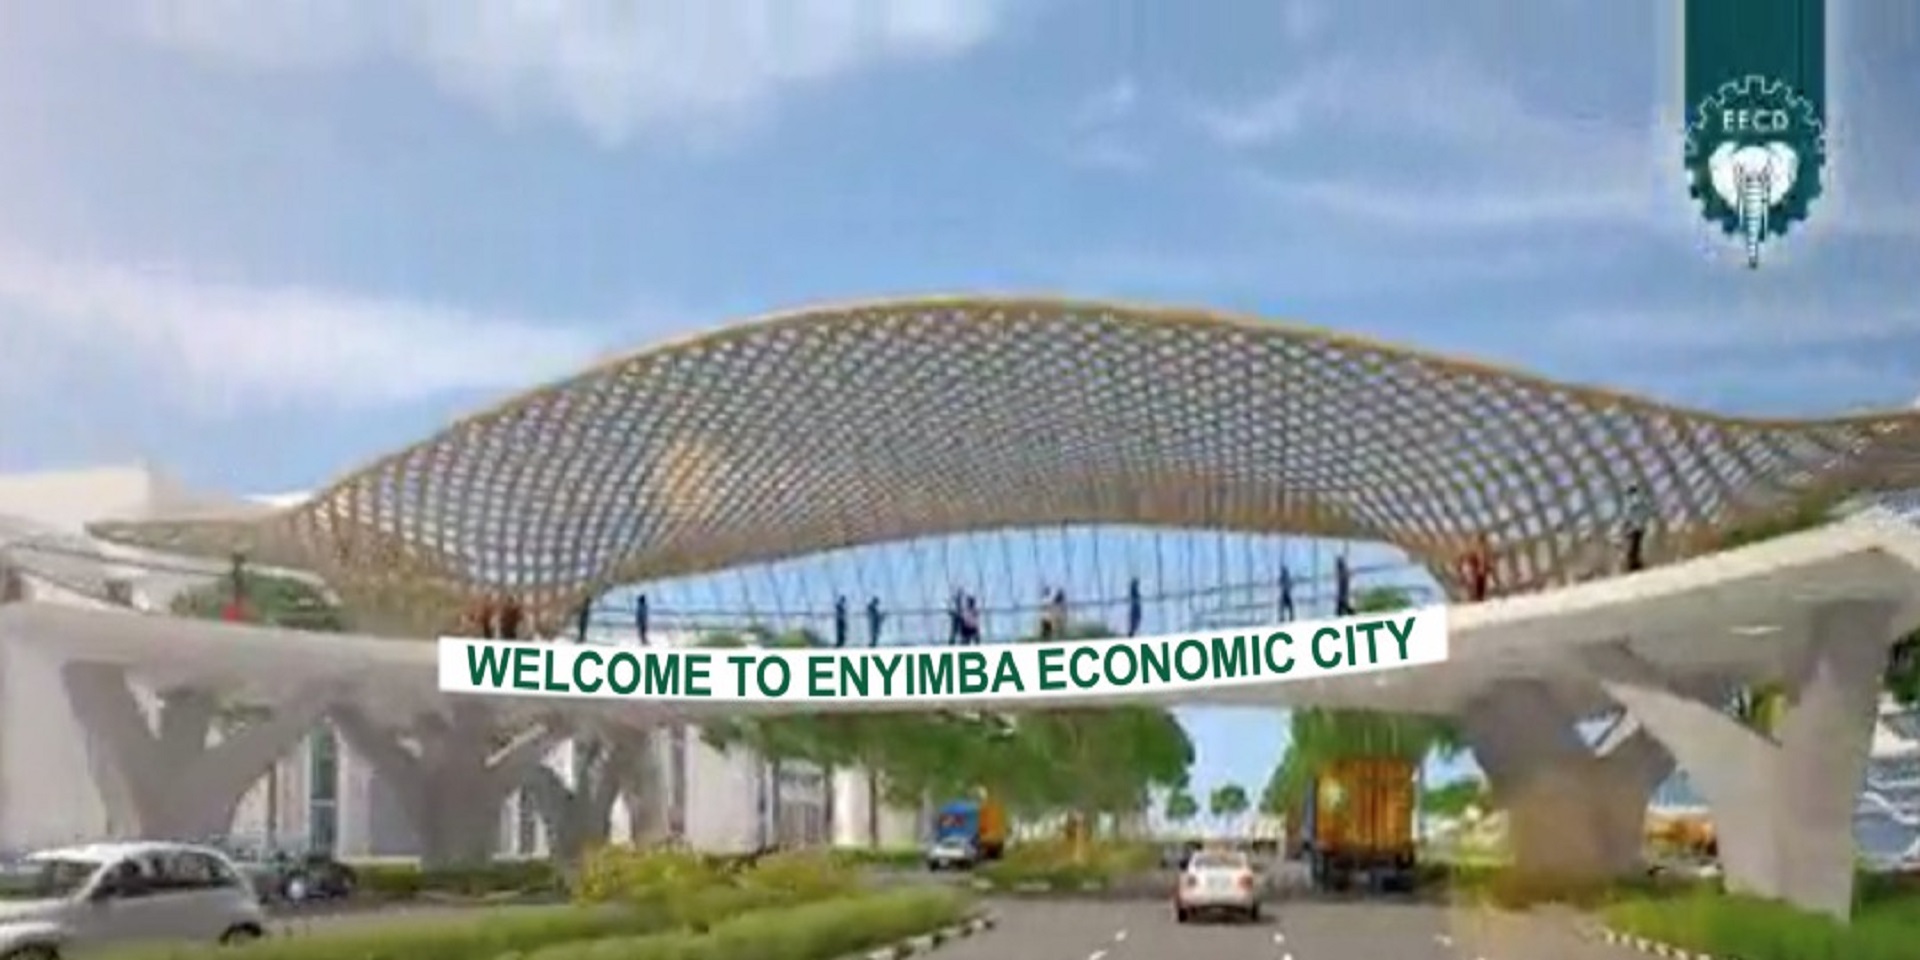 President Buhari And Governor Ikpeazu Signs Agreement To Establish Enyimba Economic City In Abia State 16